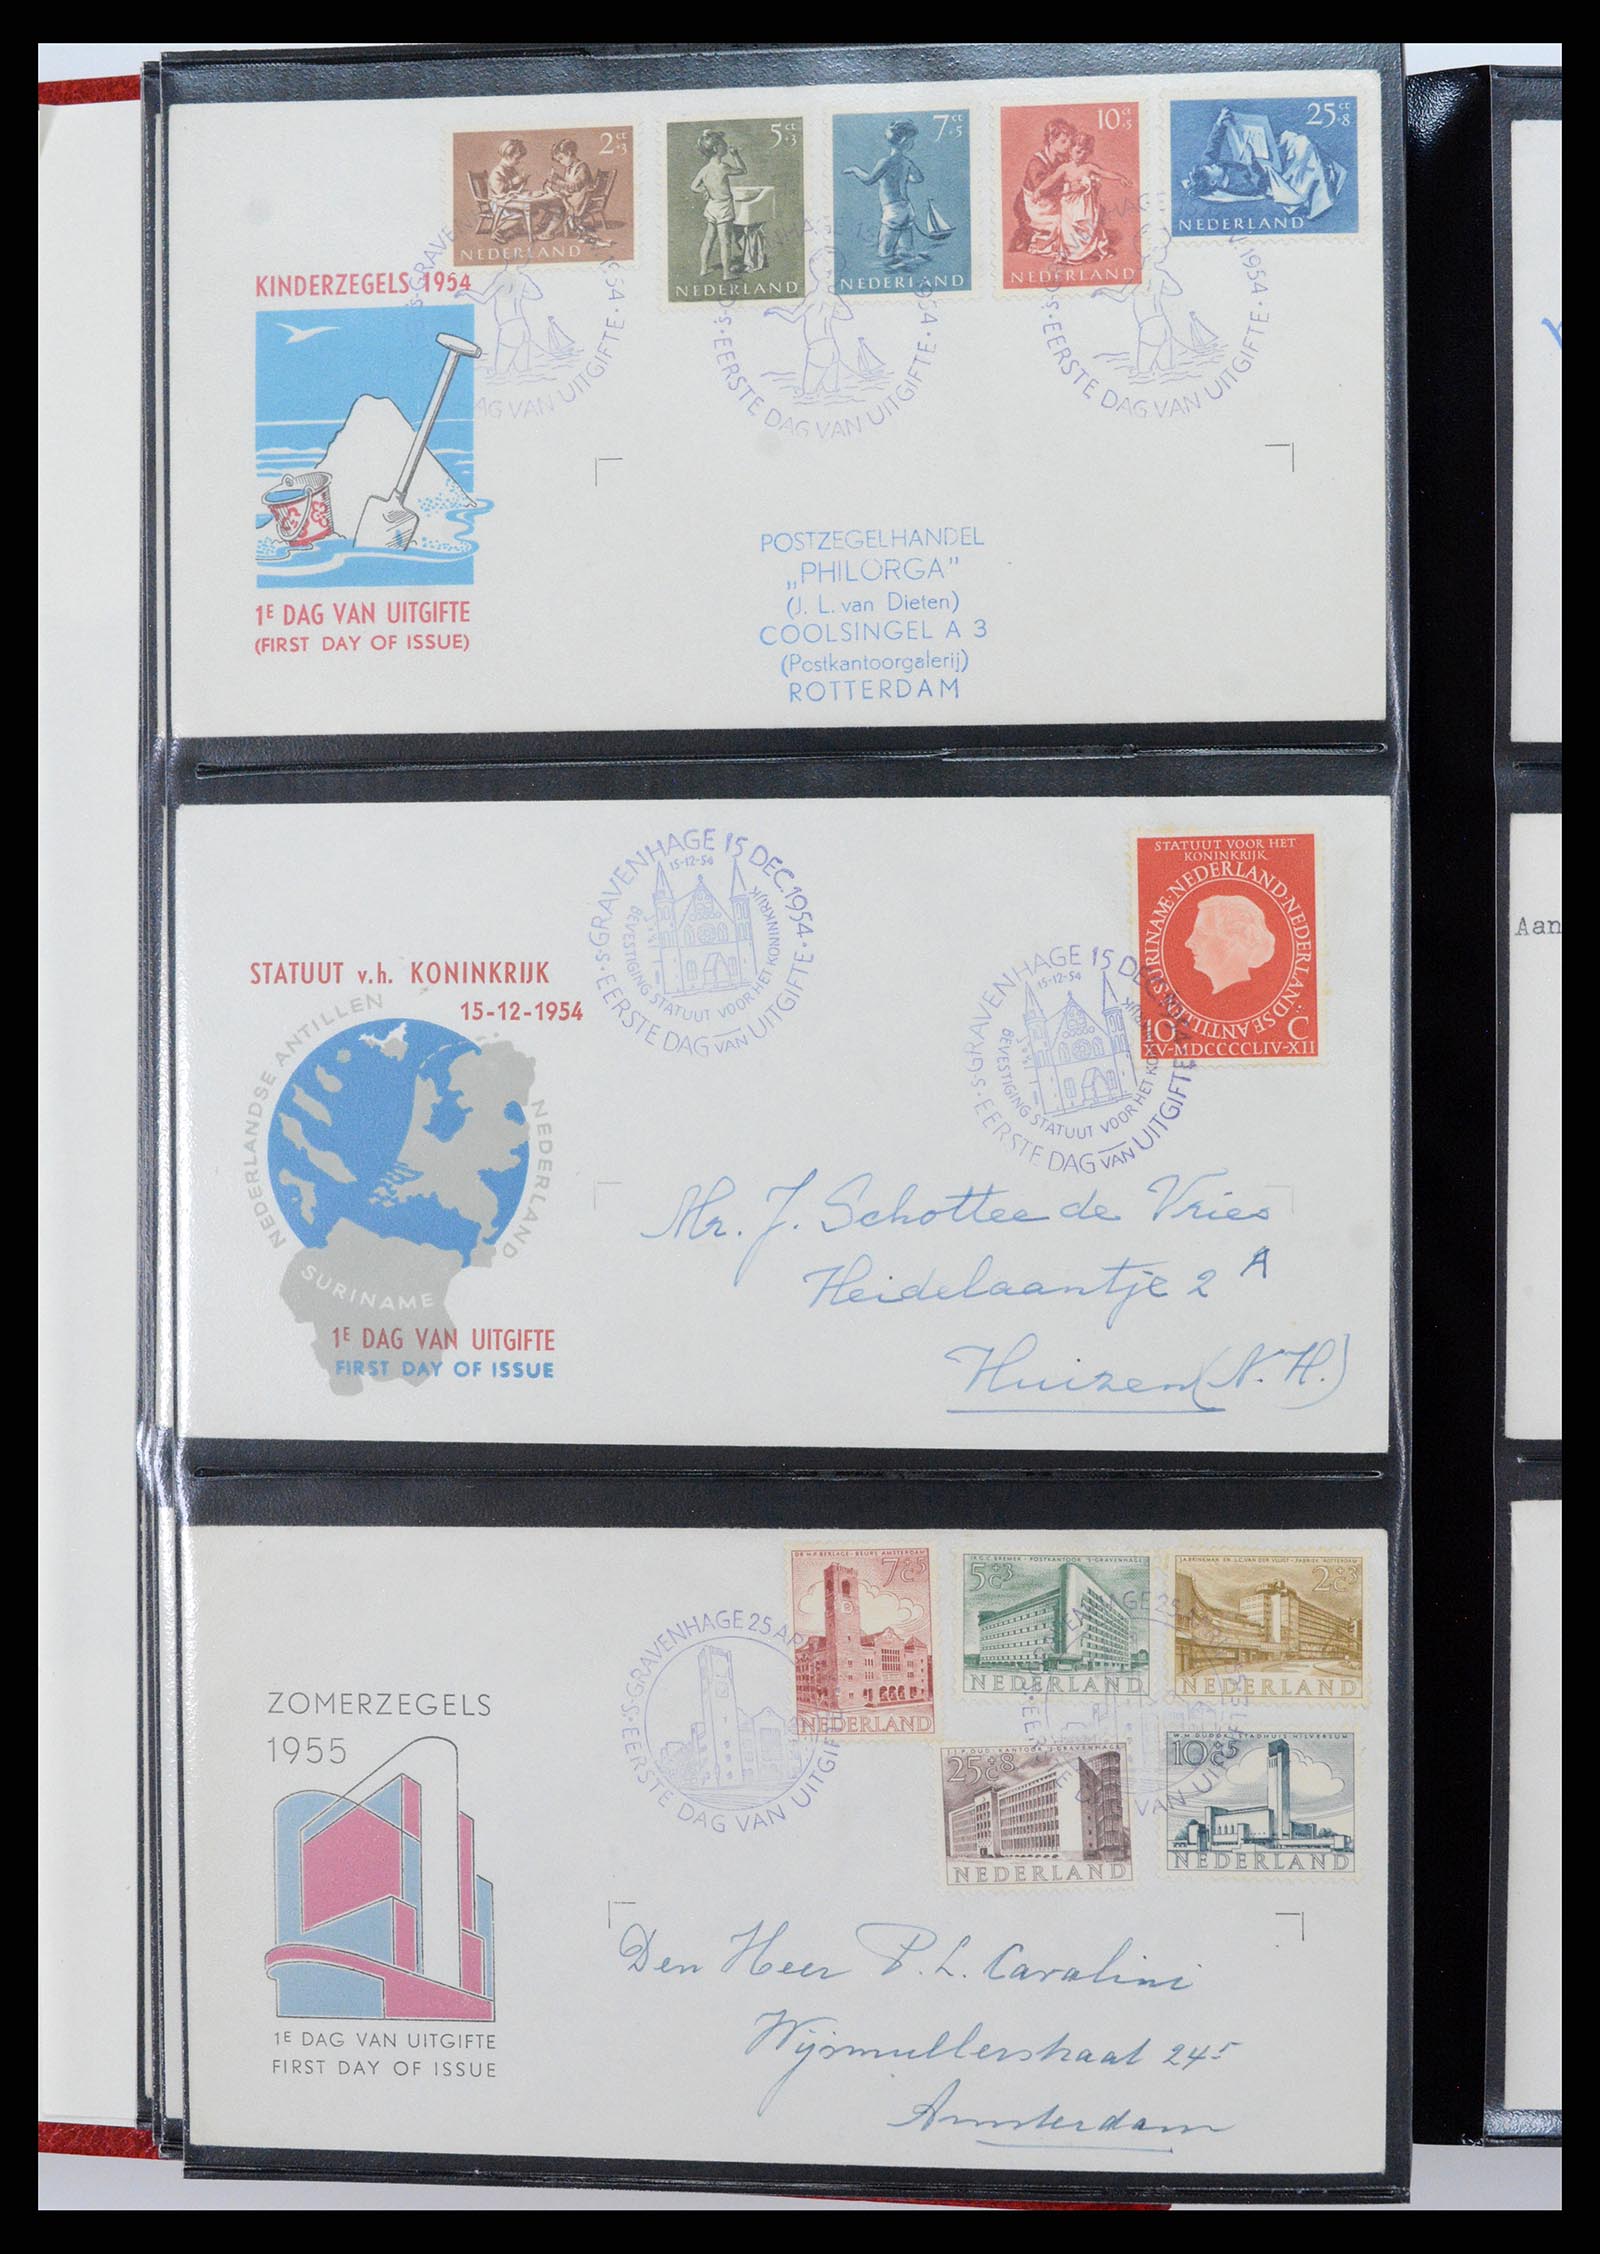 37484 009 - Stamp collection 37484 Netherlands FDC's 1950-1976.